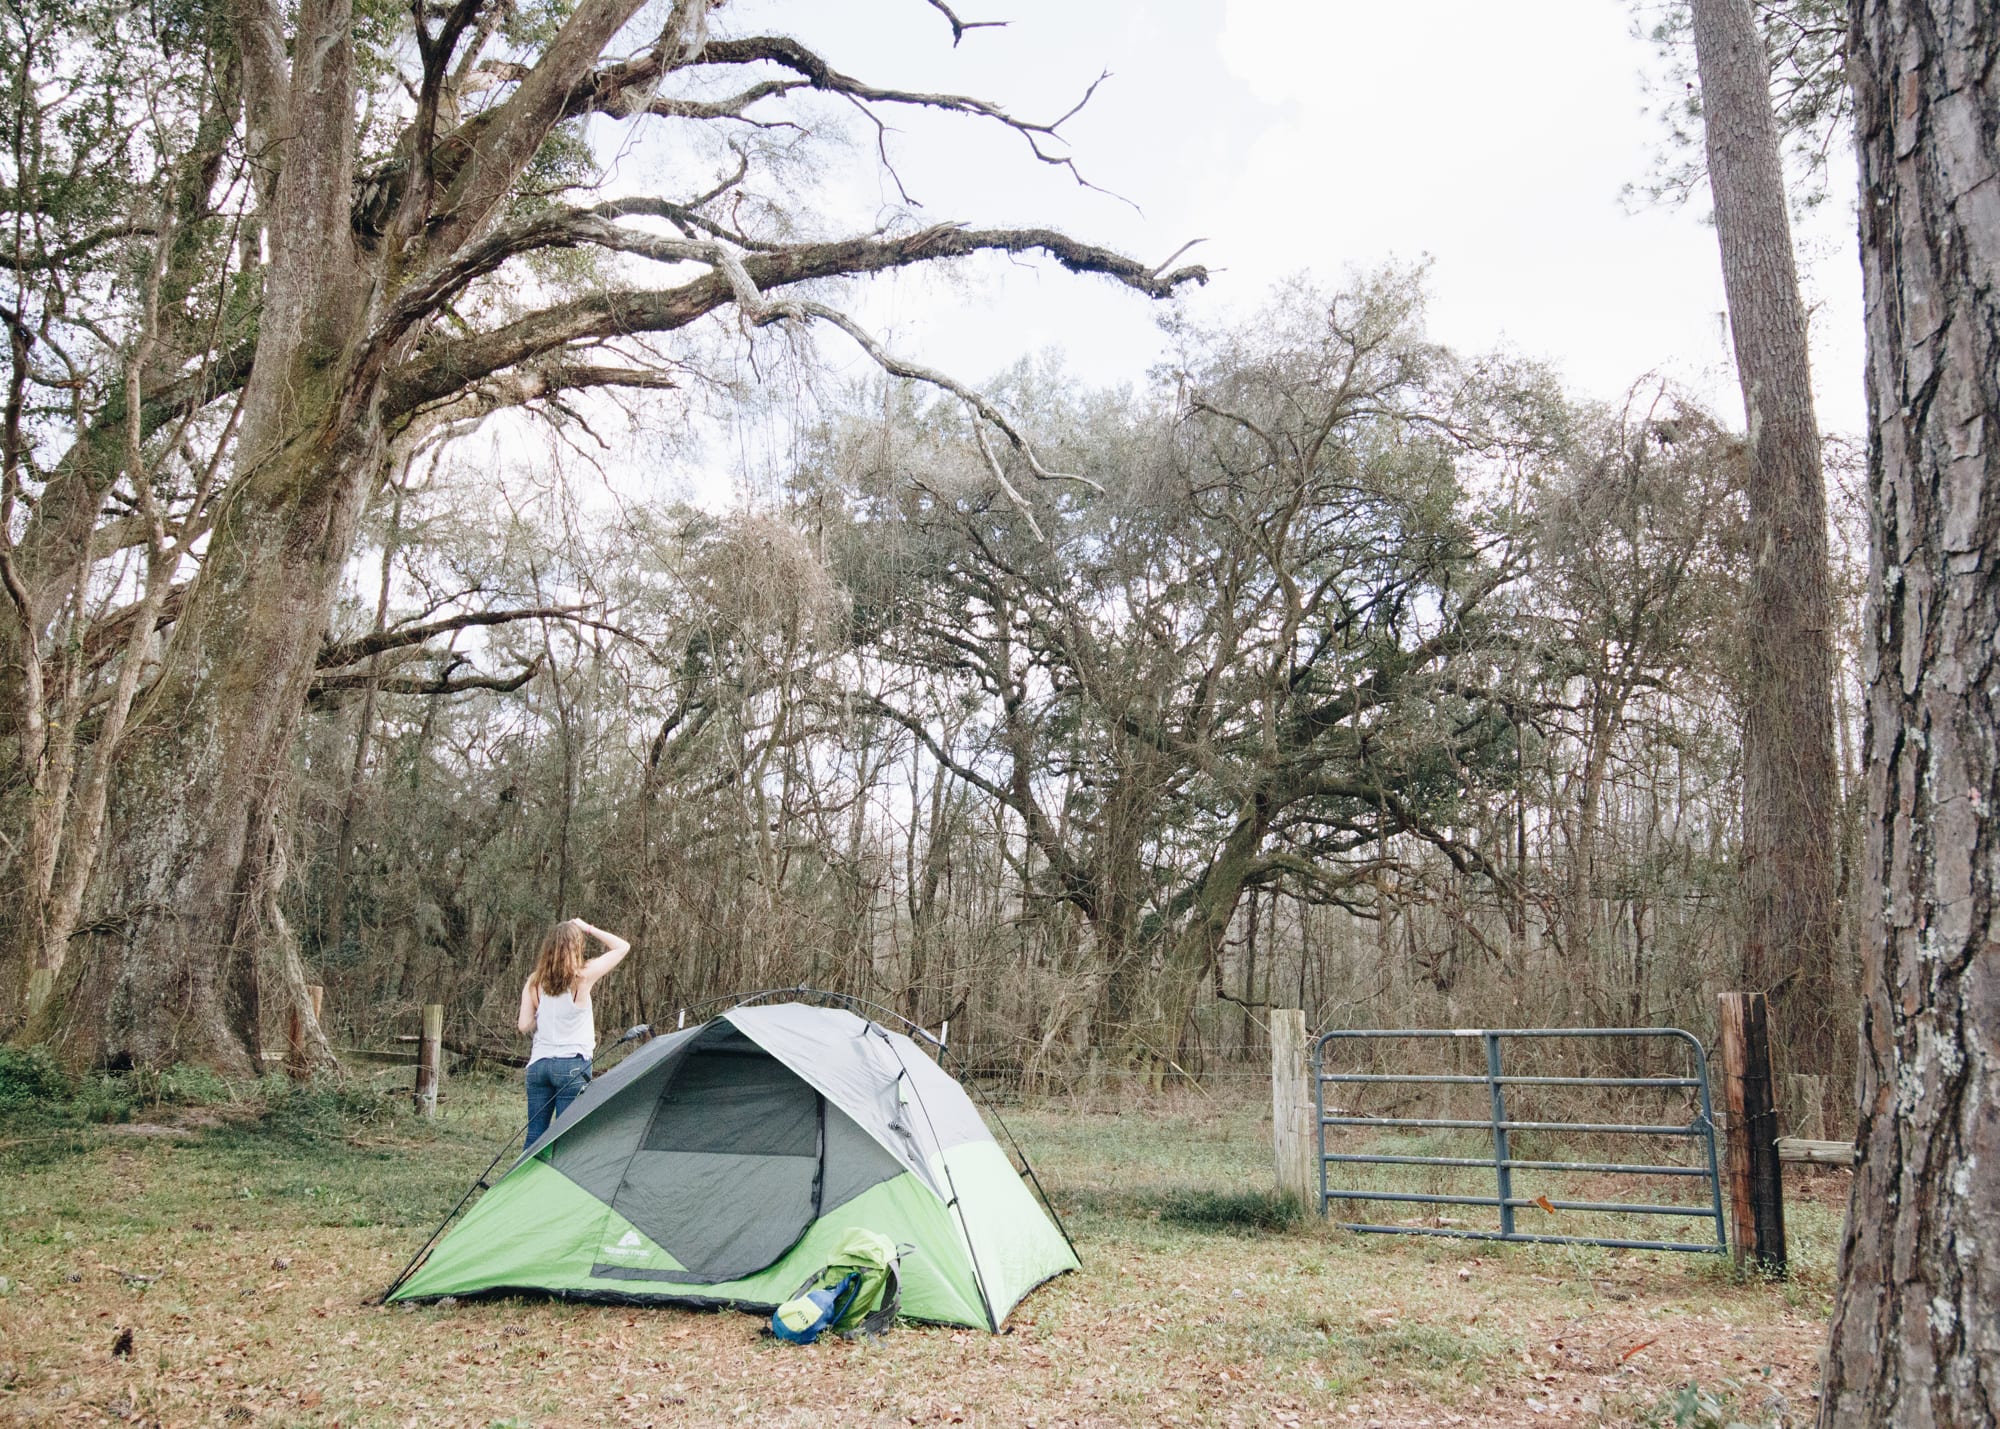 Tallahassee Outskirts Hideaway!Tent